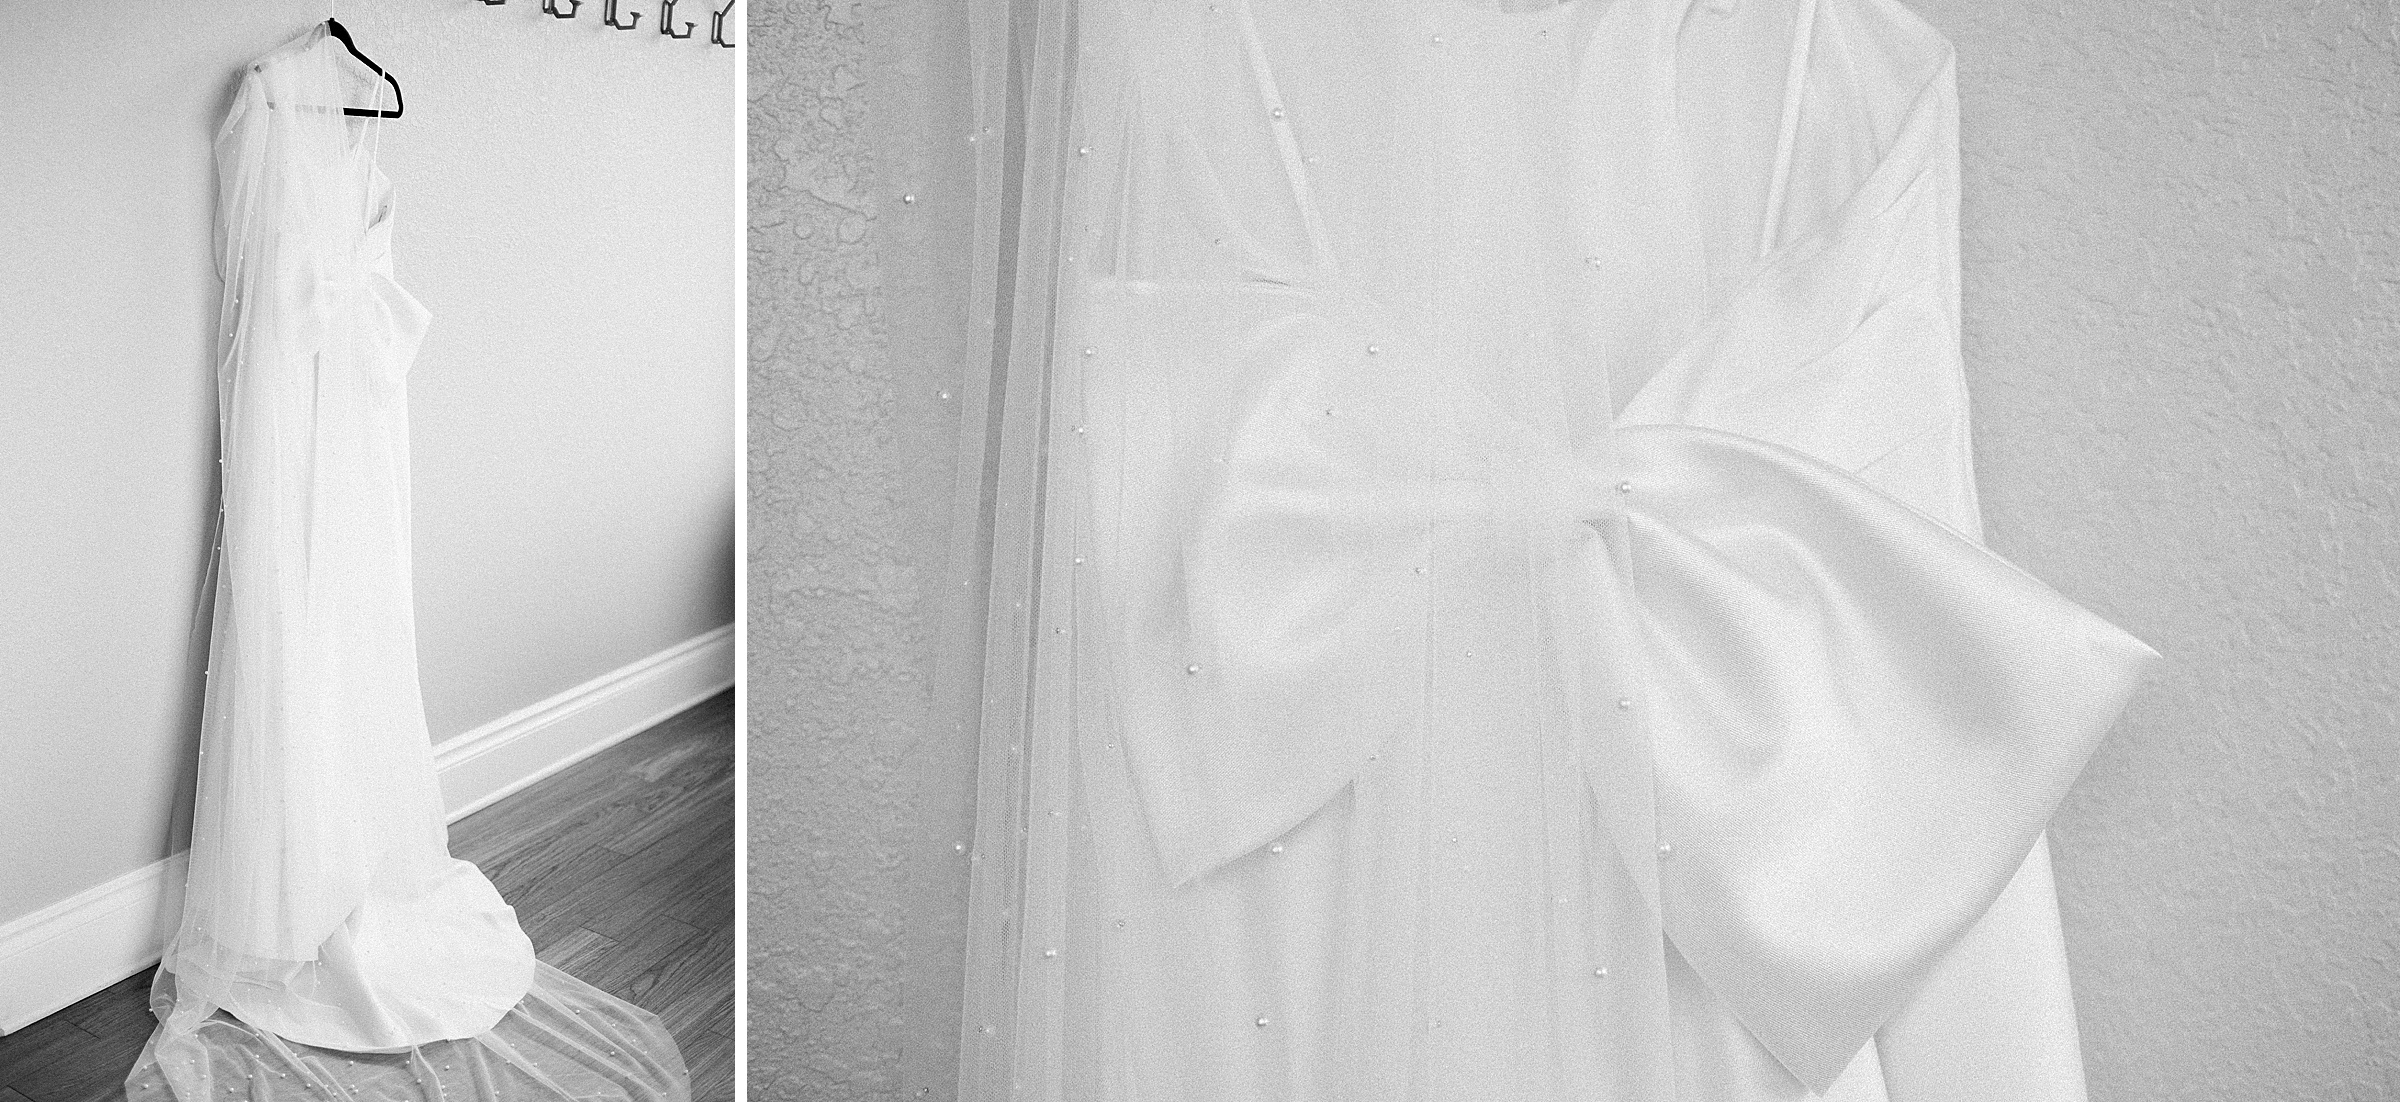 Lillie Trey's vogue wedding Cathedral-length veil See-through gloves with pearls